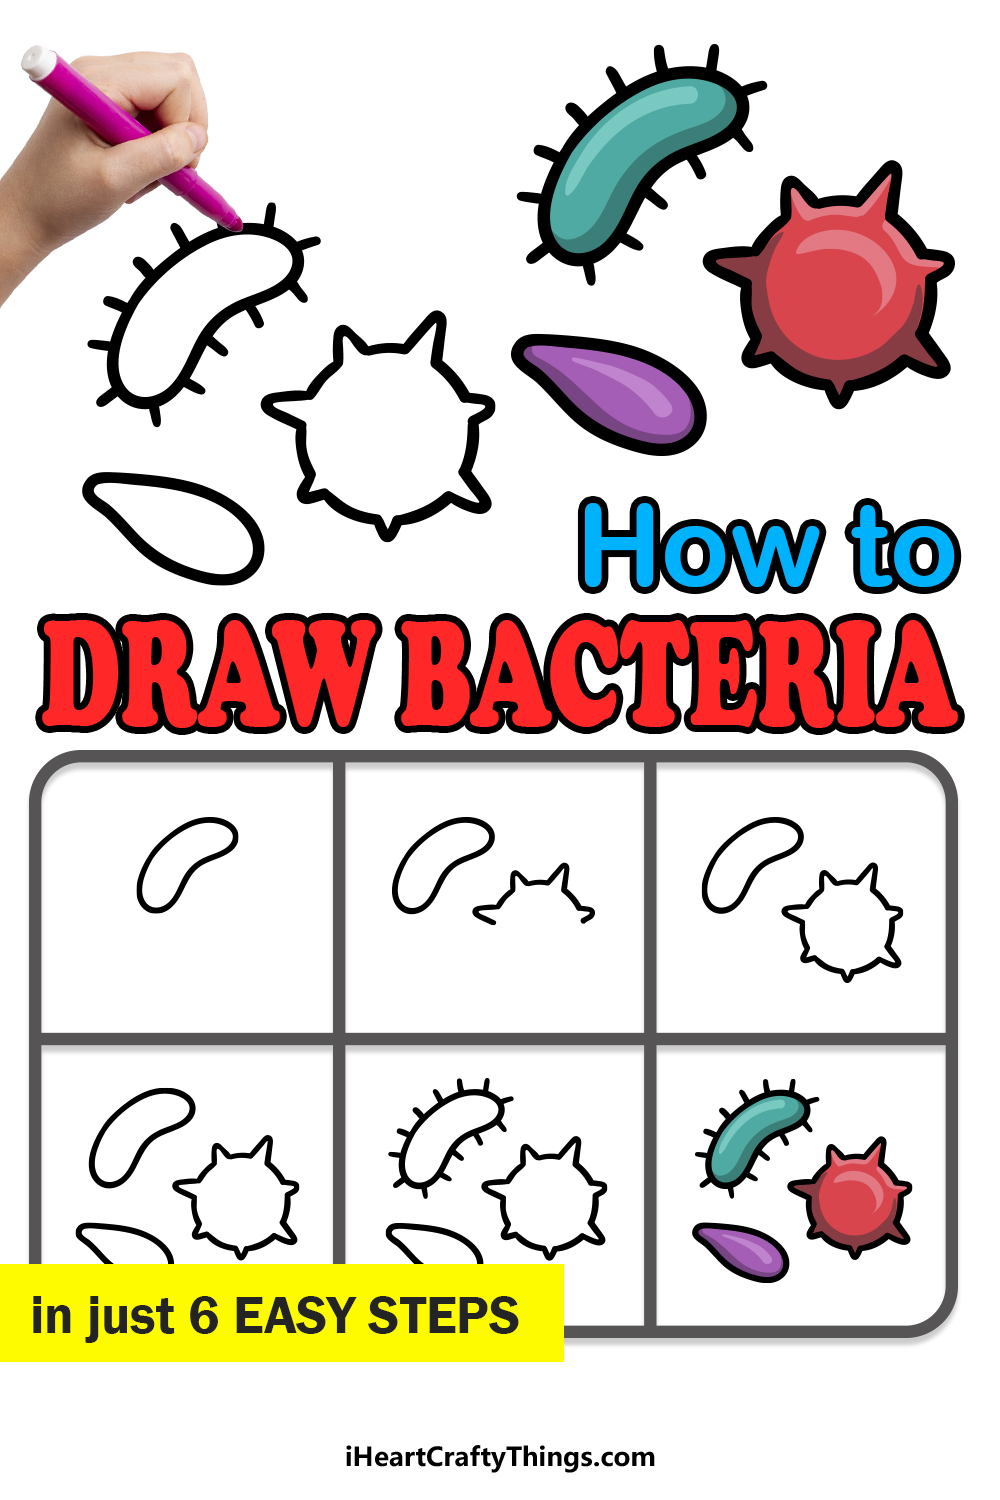 How to Draw Bacteria in 6 easy steps